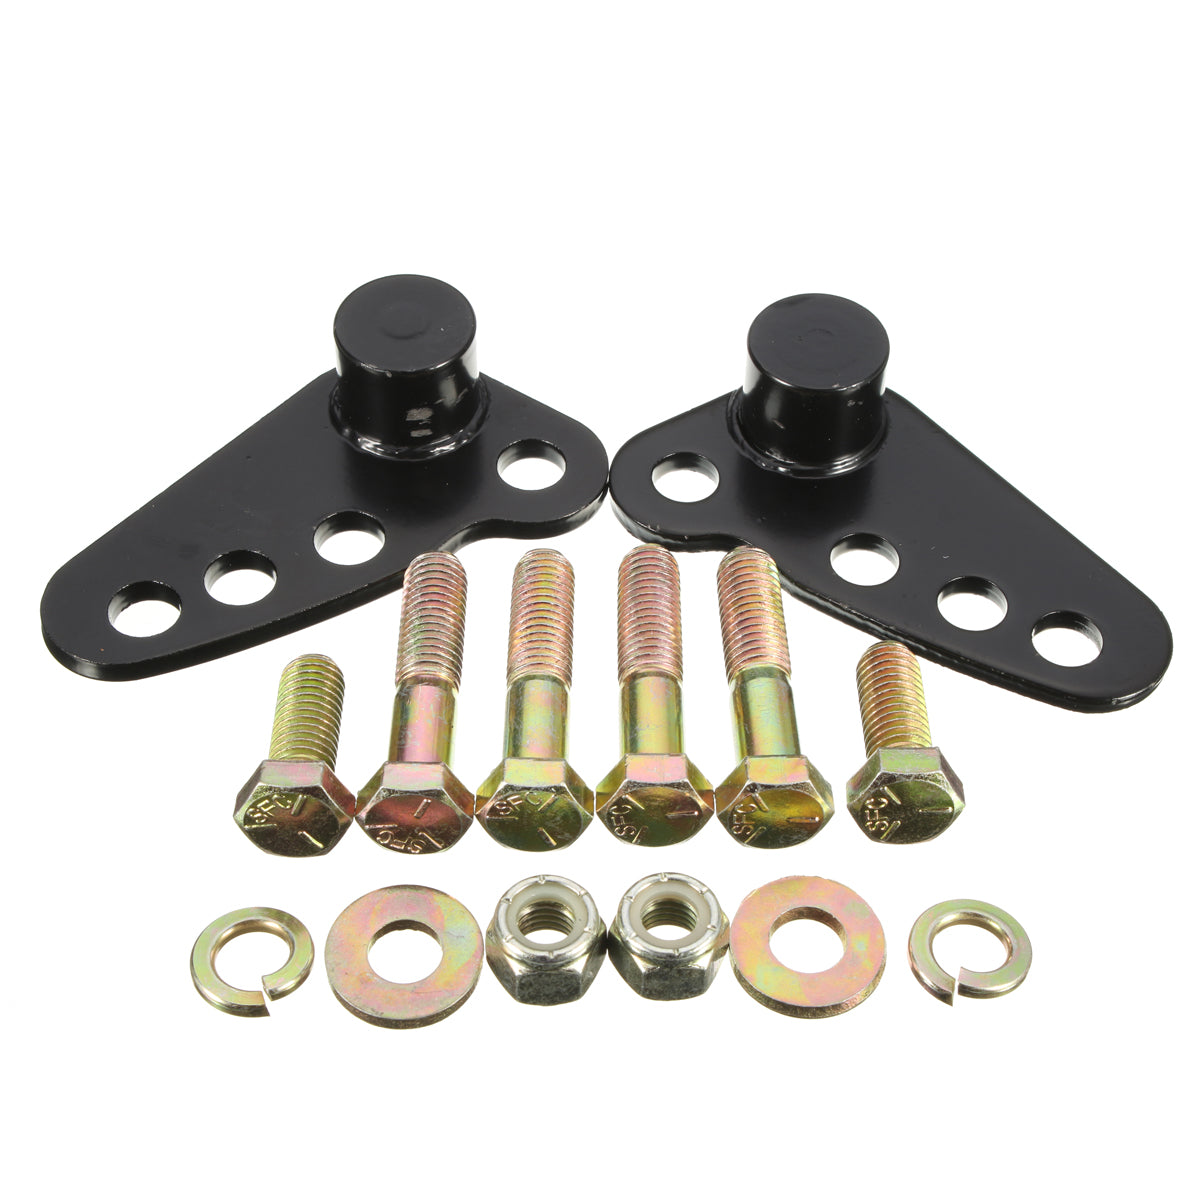 Rosy Brown 1inch-3inch Rear Lowering Kit Steel For Harley Street Electra Ultra Glide 02-15